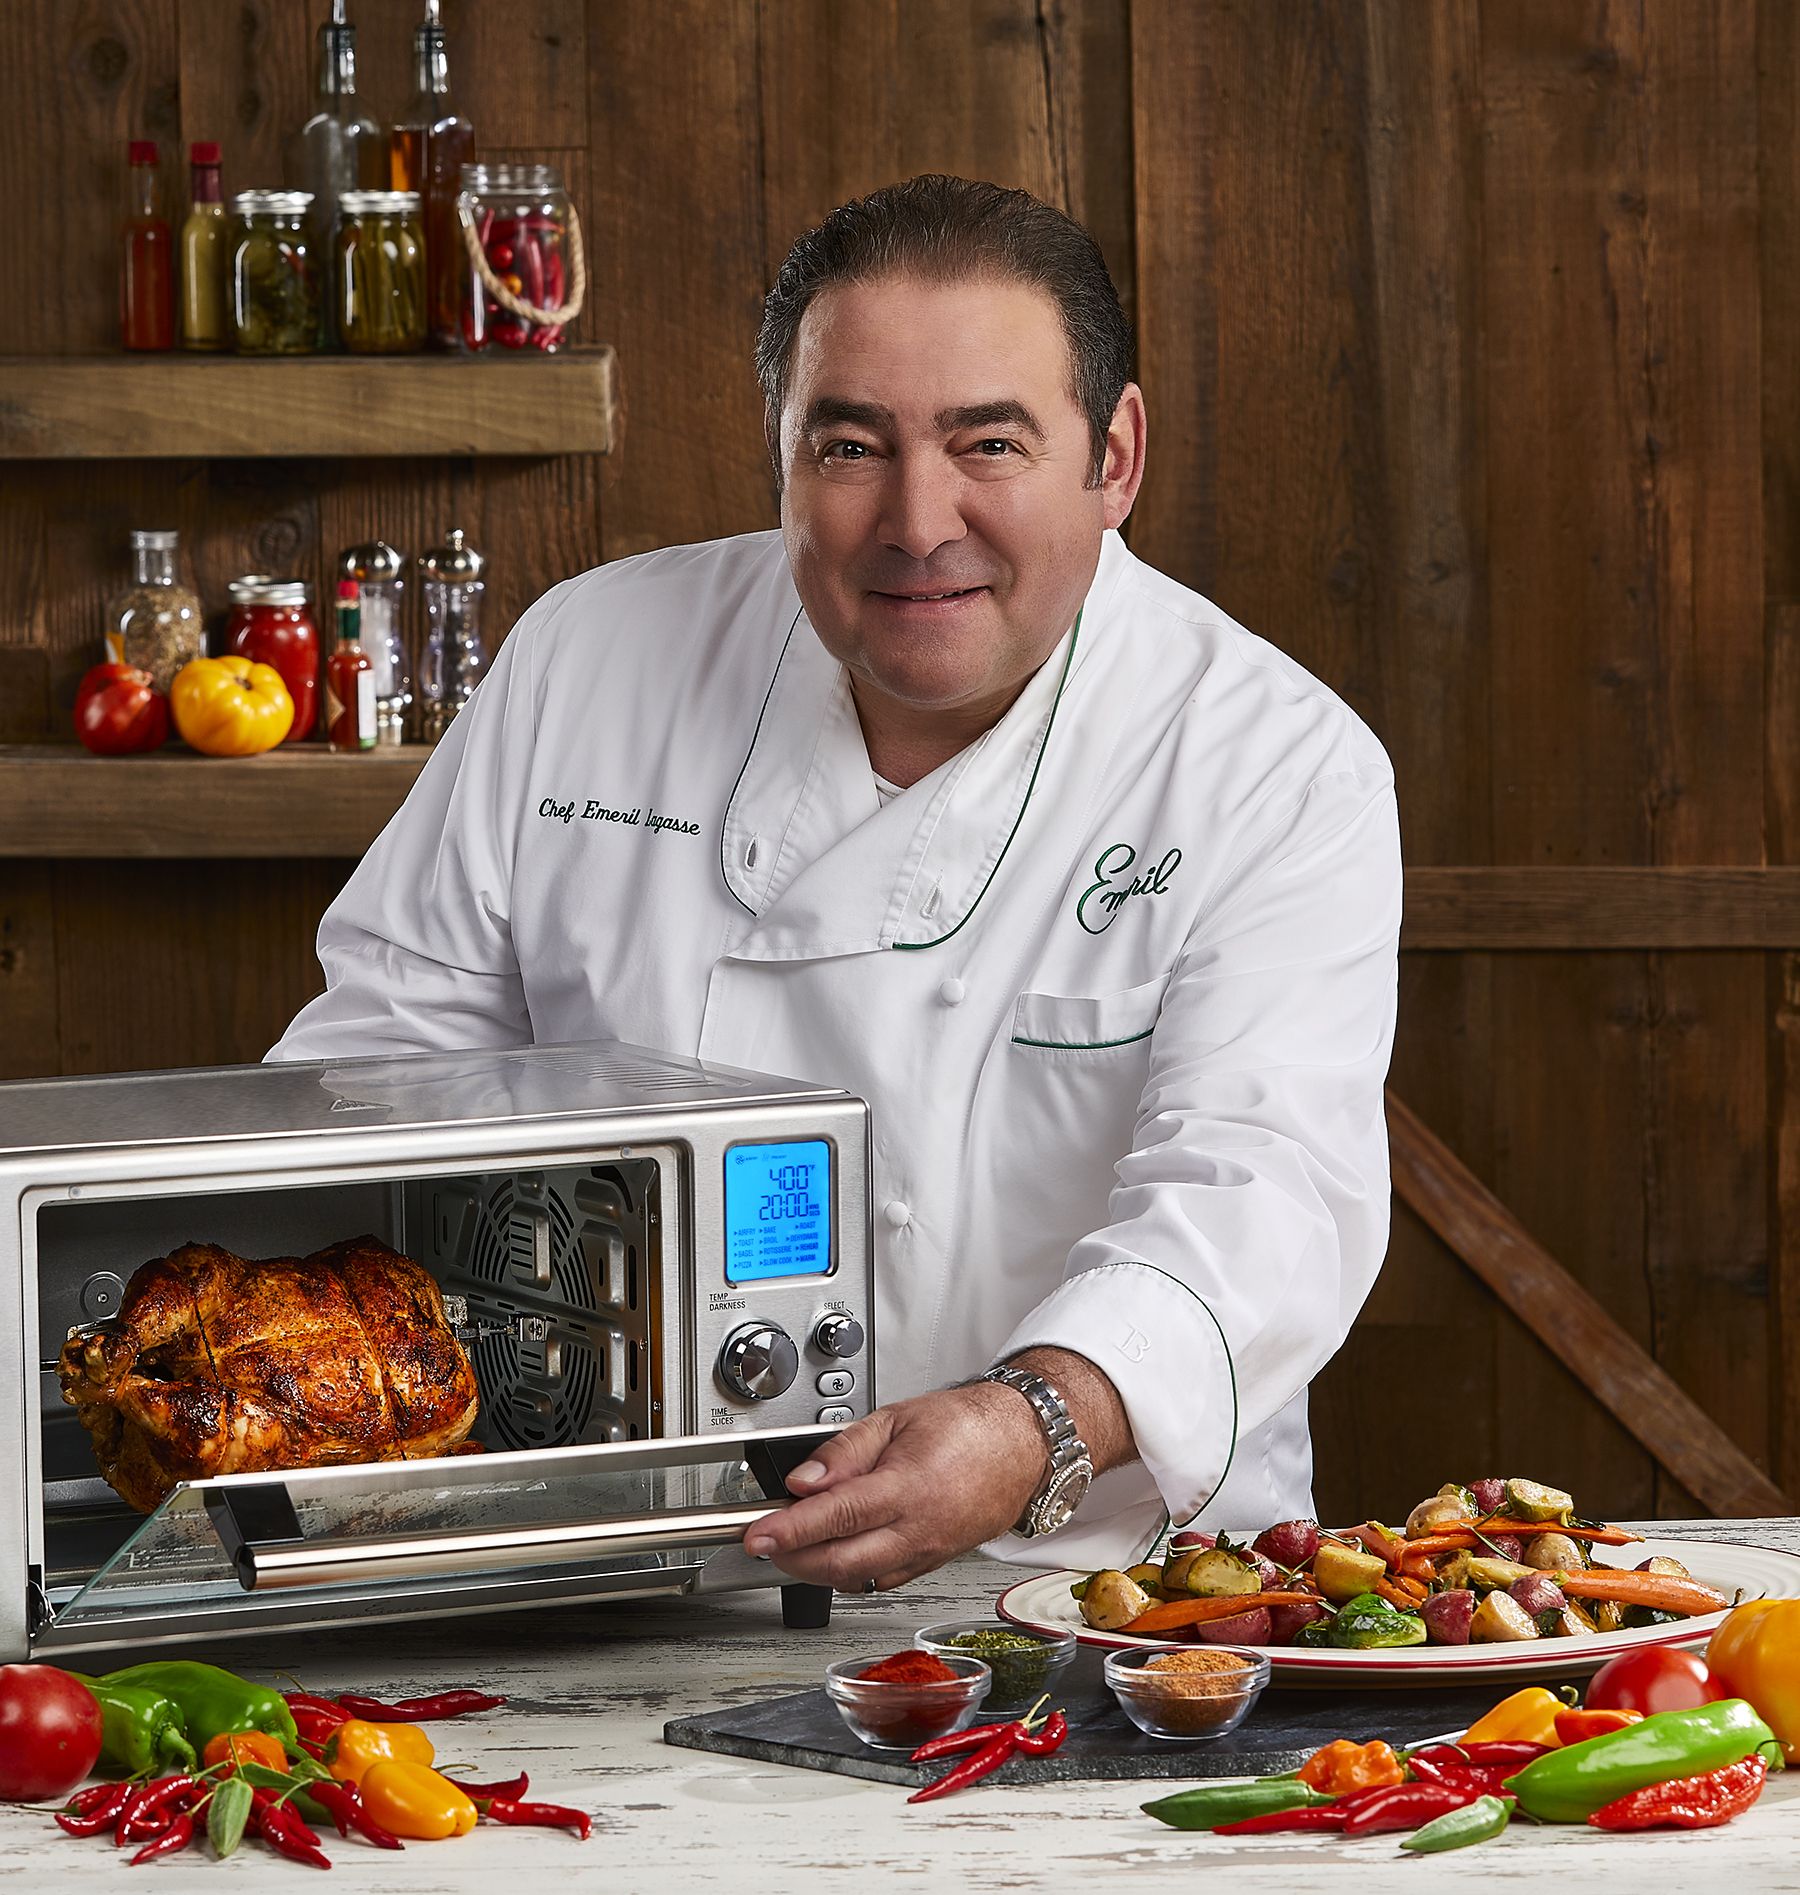 Rotisserie ✅ Emeril Lagasse 12 Qt Stainless Steel Air Fryer Pro w 7 Functions 